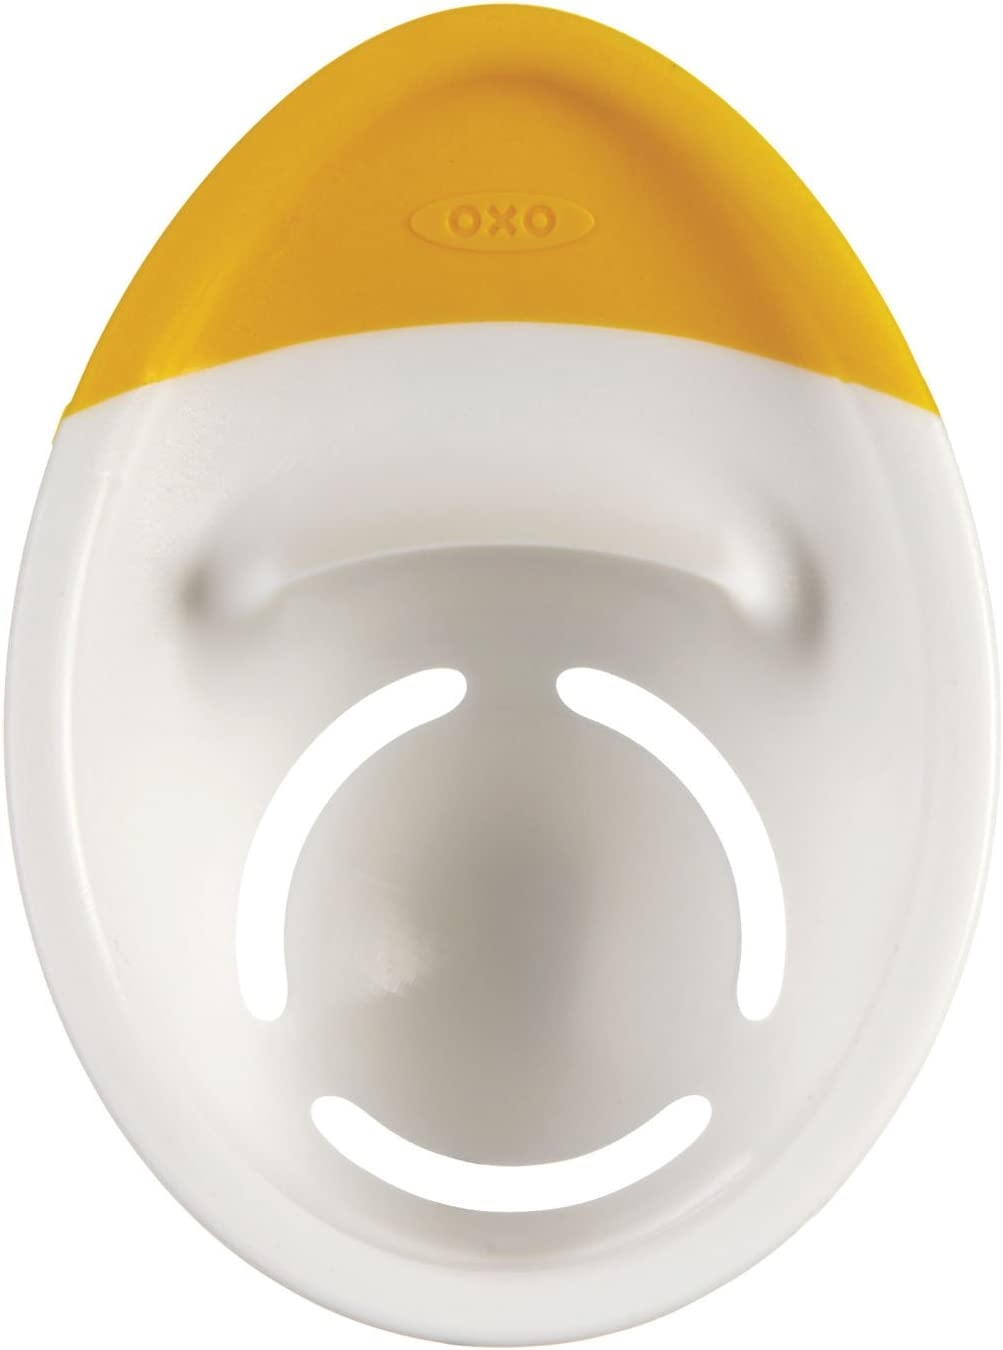 OXO Good Grips 3-in-1 Egg Separator Import To Shop ×Product customization General Description Gallery Reviews Variations